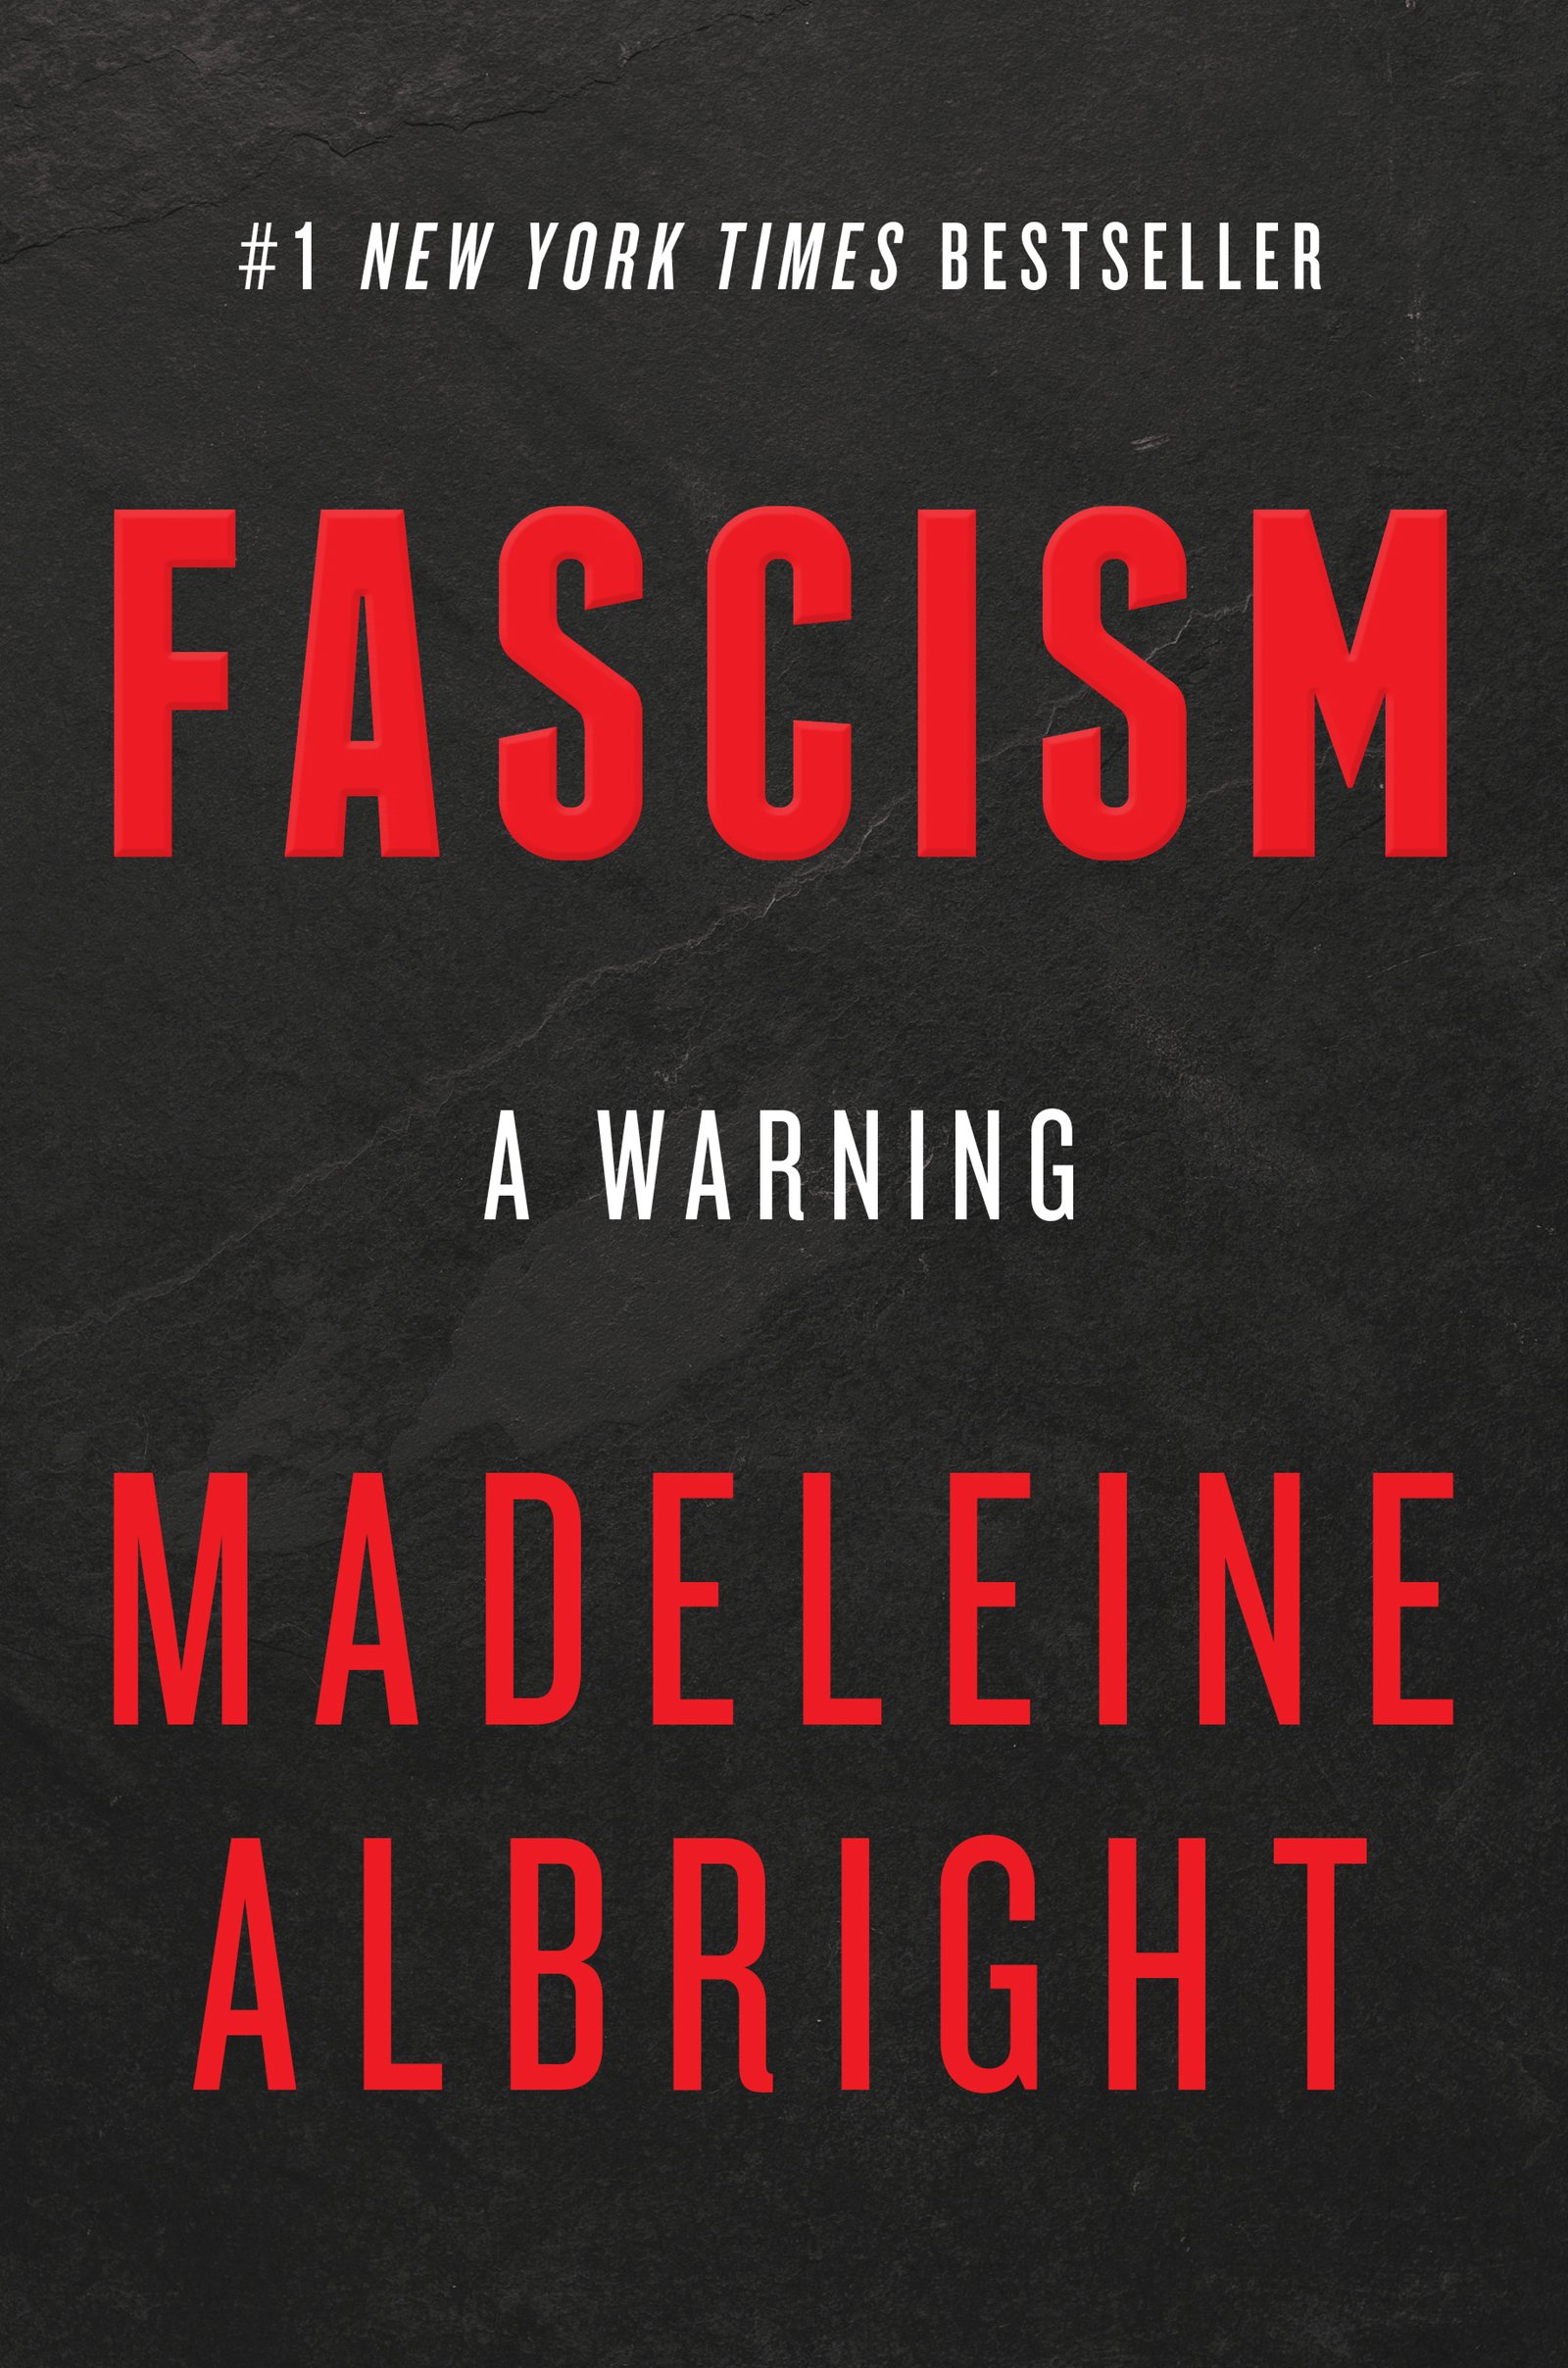 Book Cover Fascism: A Warning